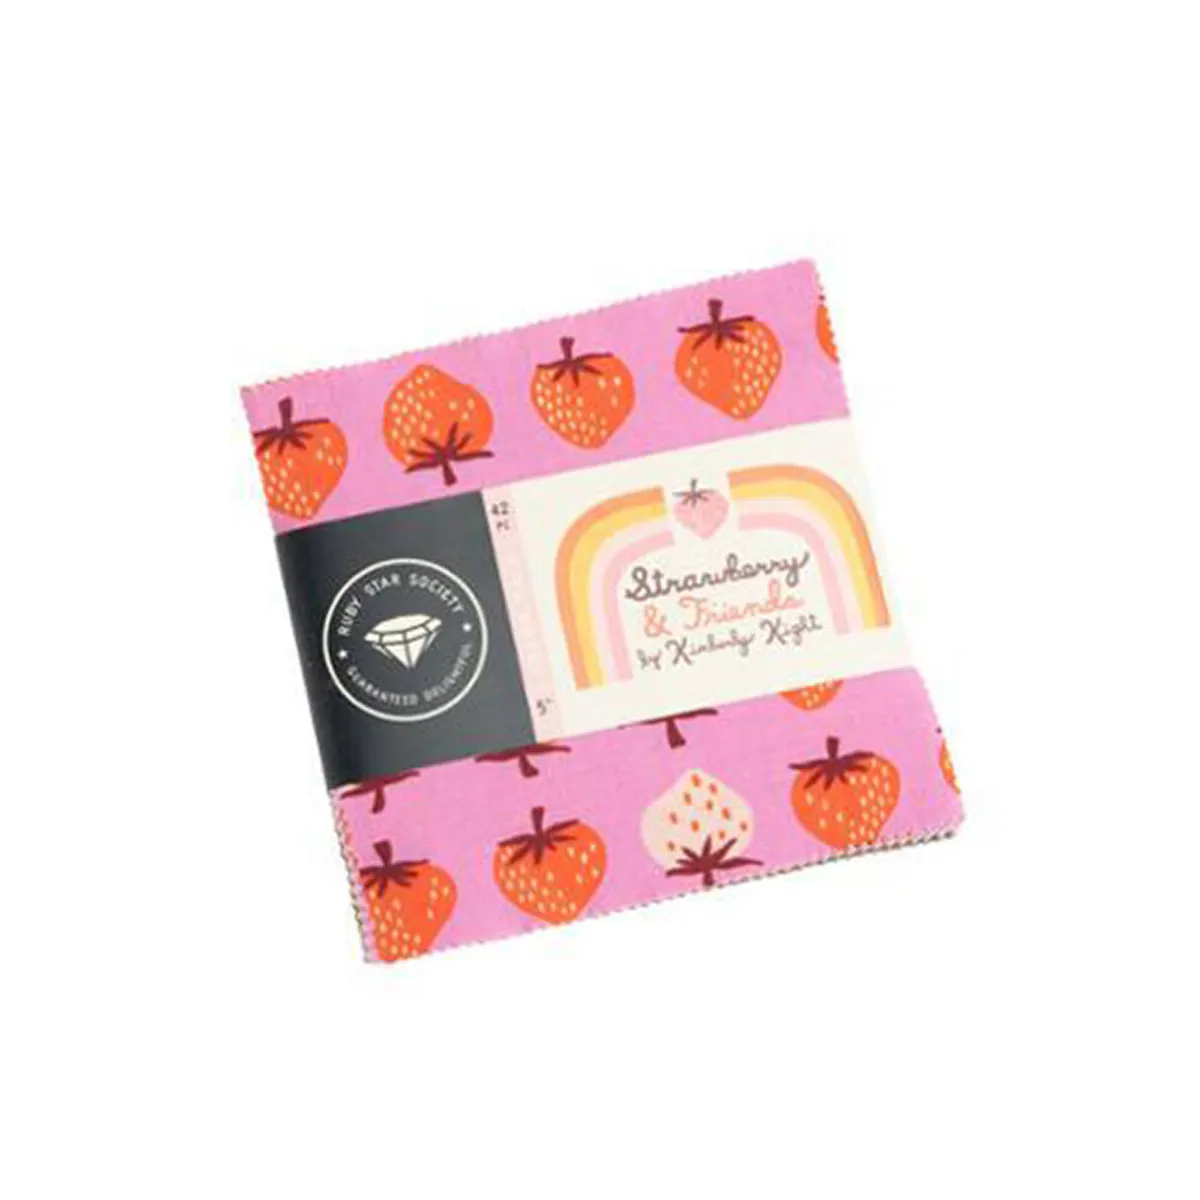 Strawberries and friends charm pack